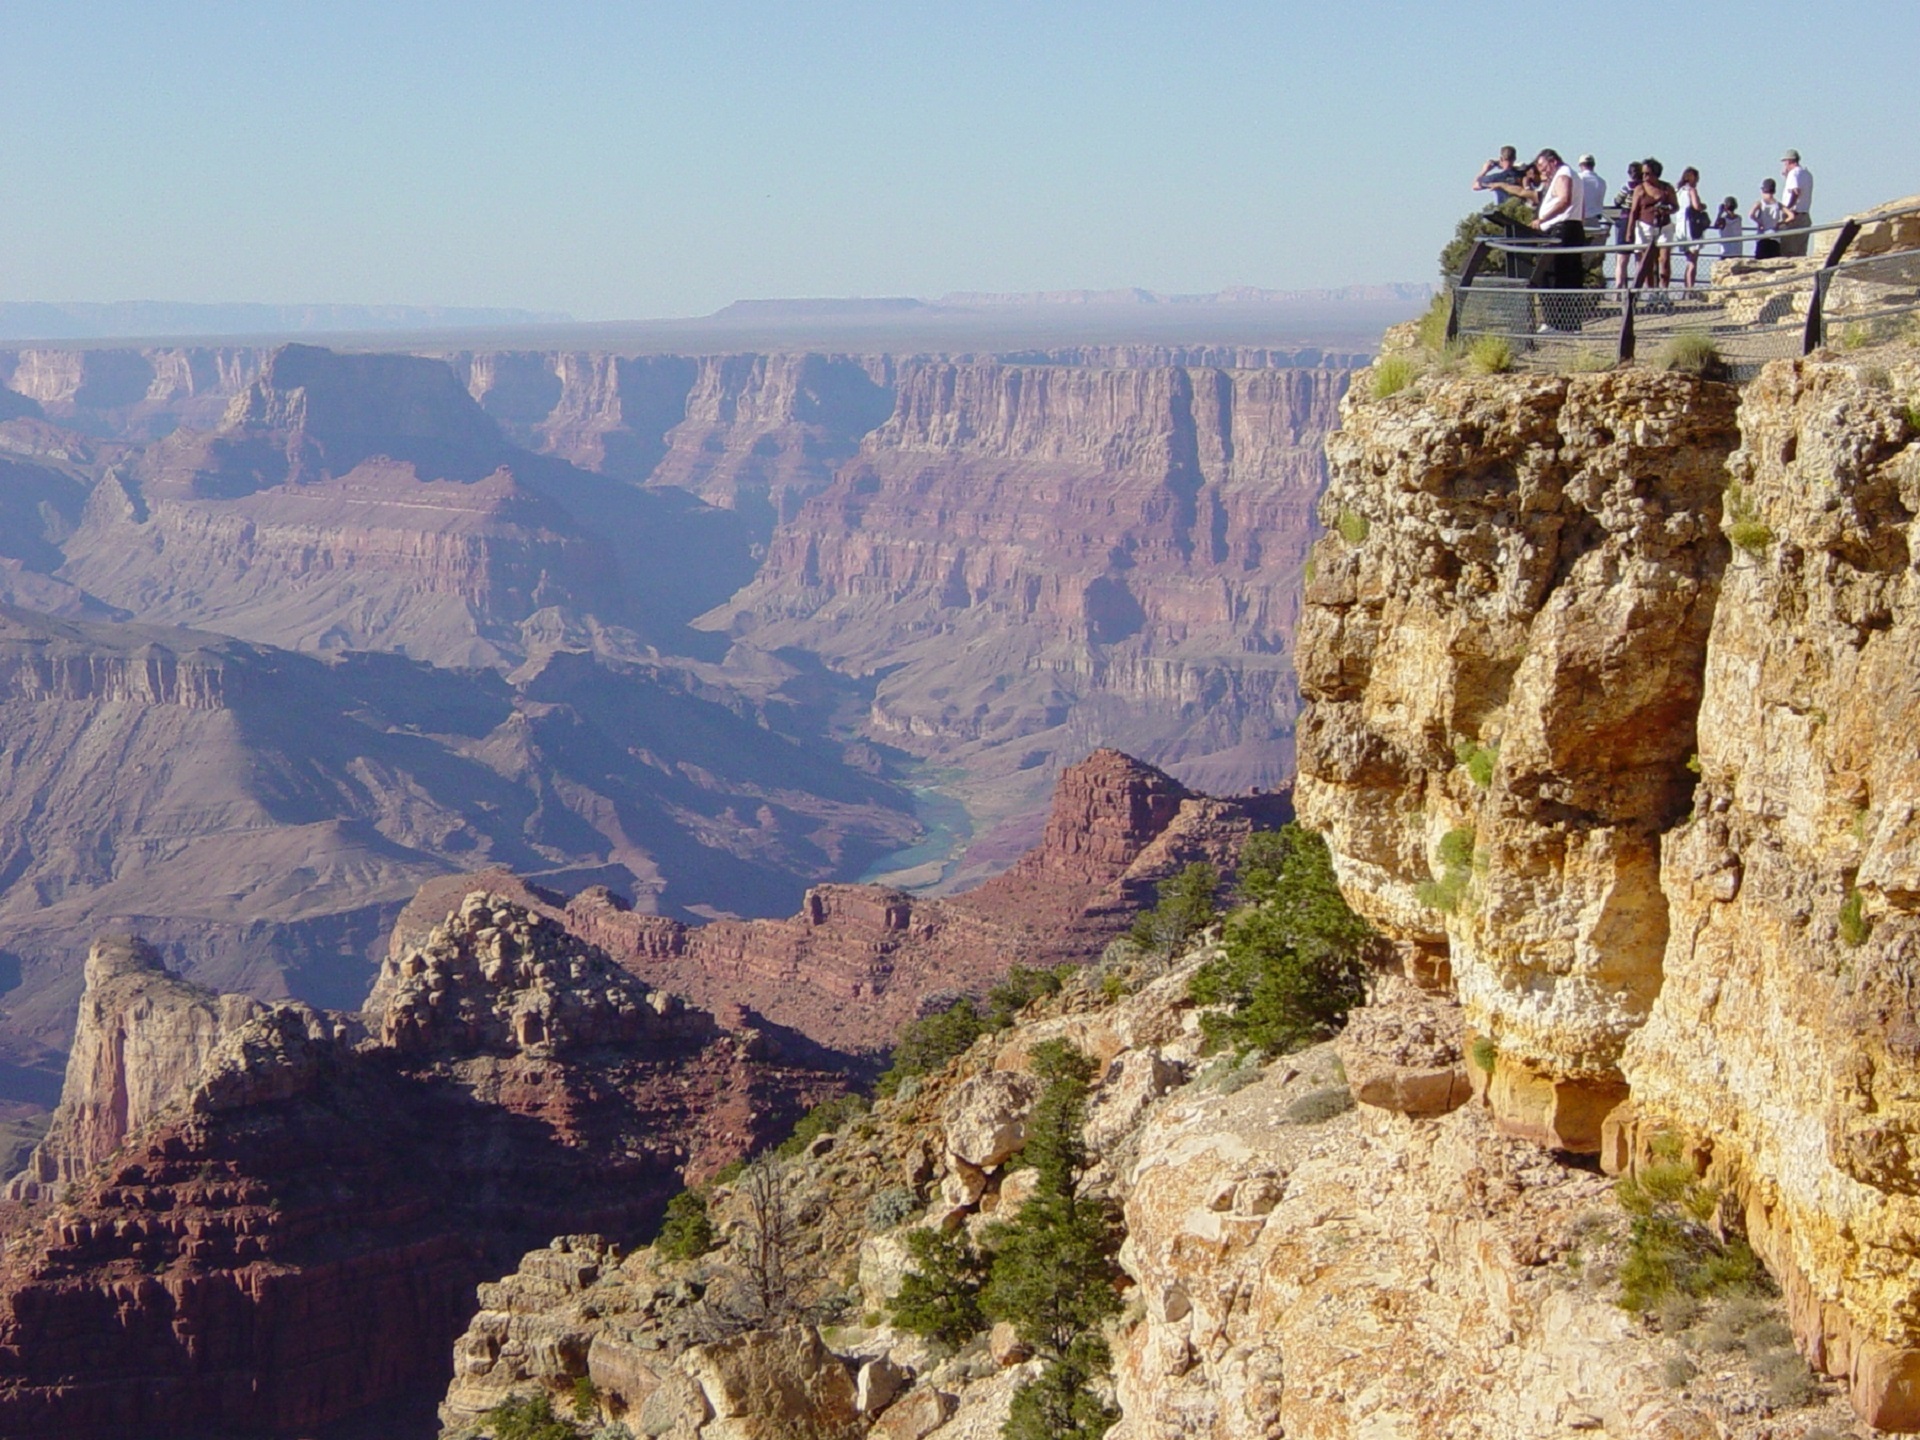 People at the observation deck in the Grand Canyon free image download